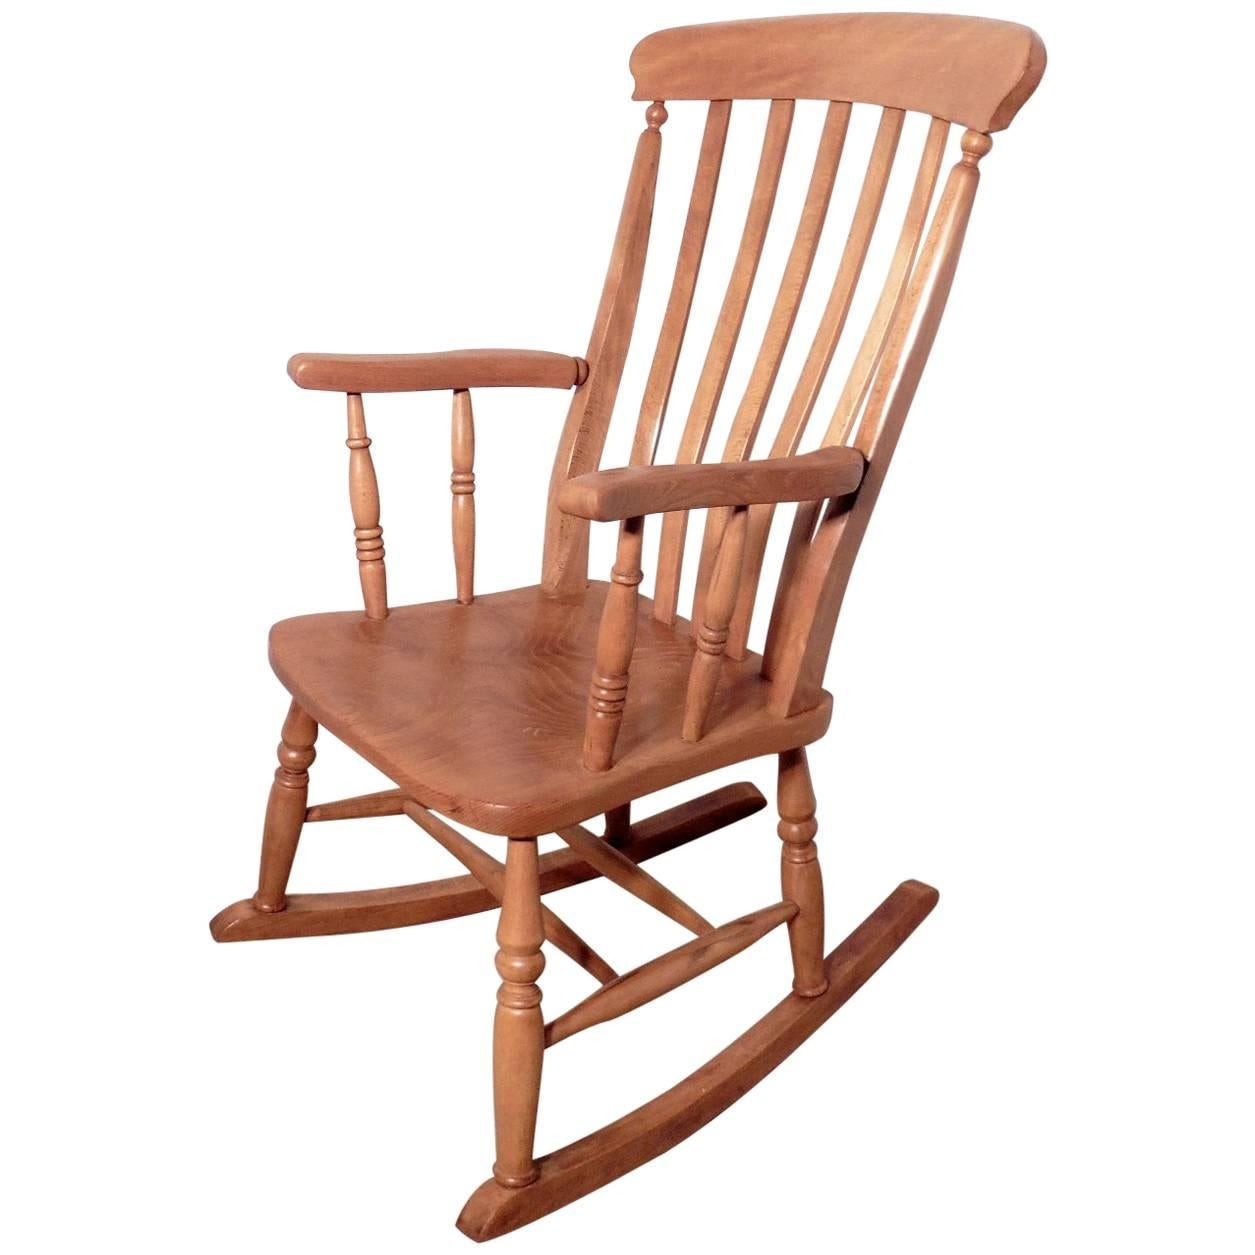 Victorian Beech and Elm Slat Back Carver Rocking Chair